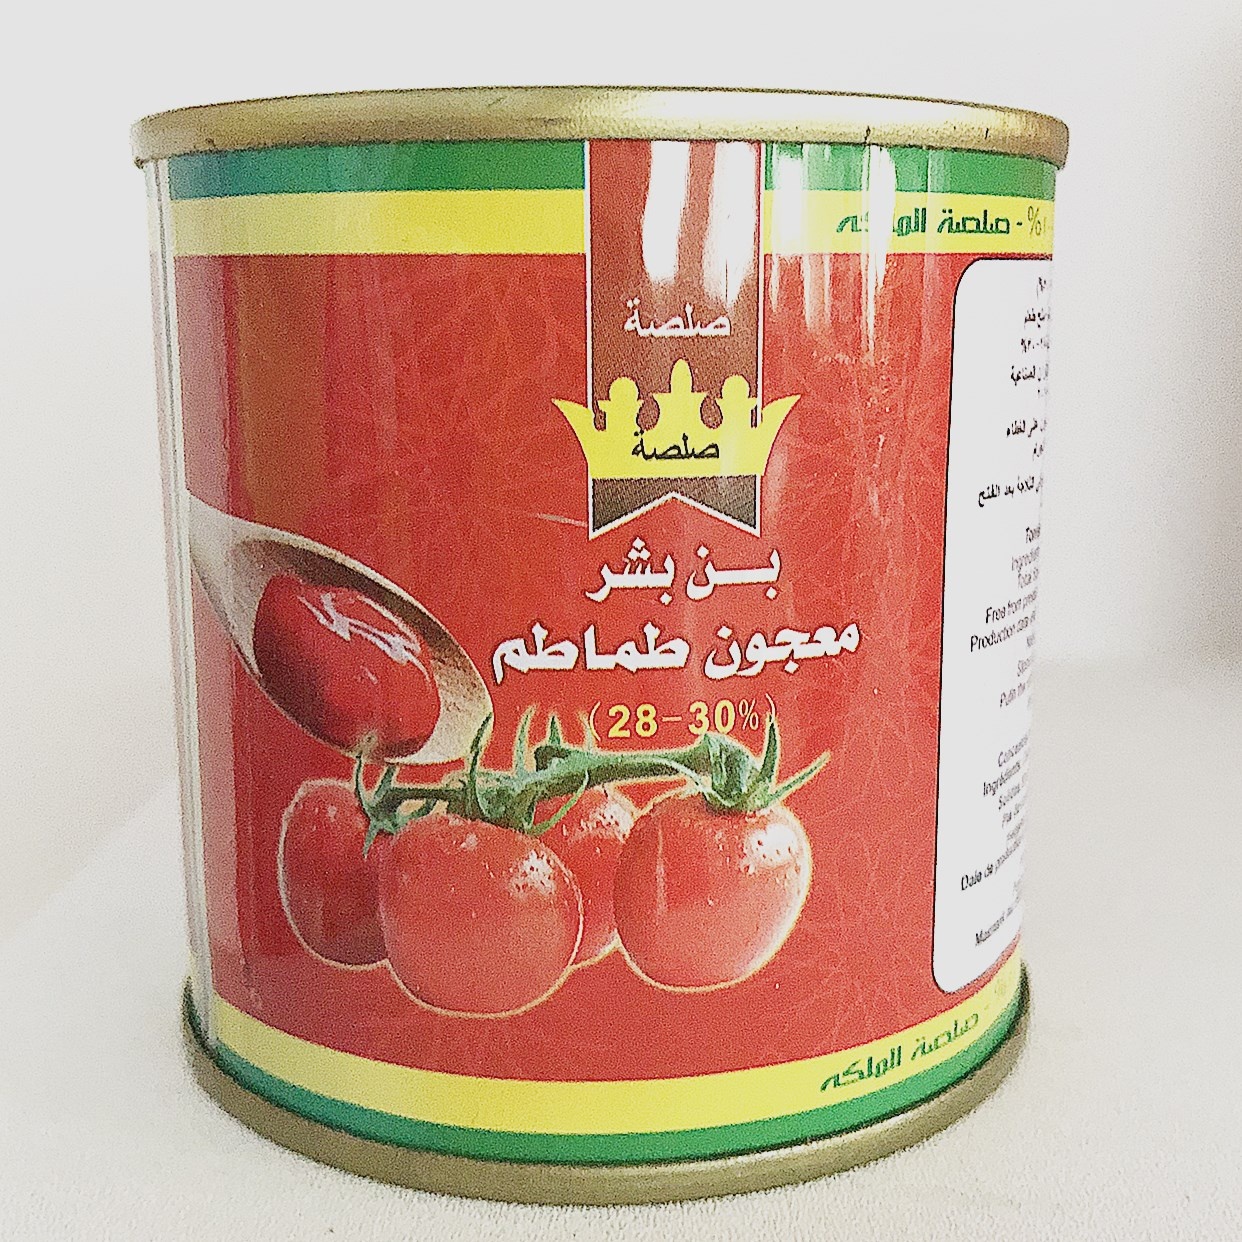 Canned Tomato Paste and Food Supplier for Dubai with 100% Purity